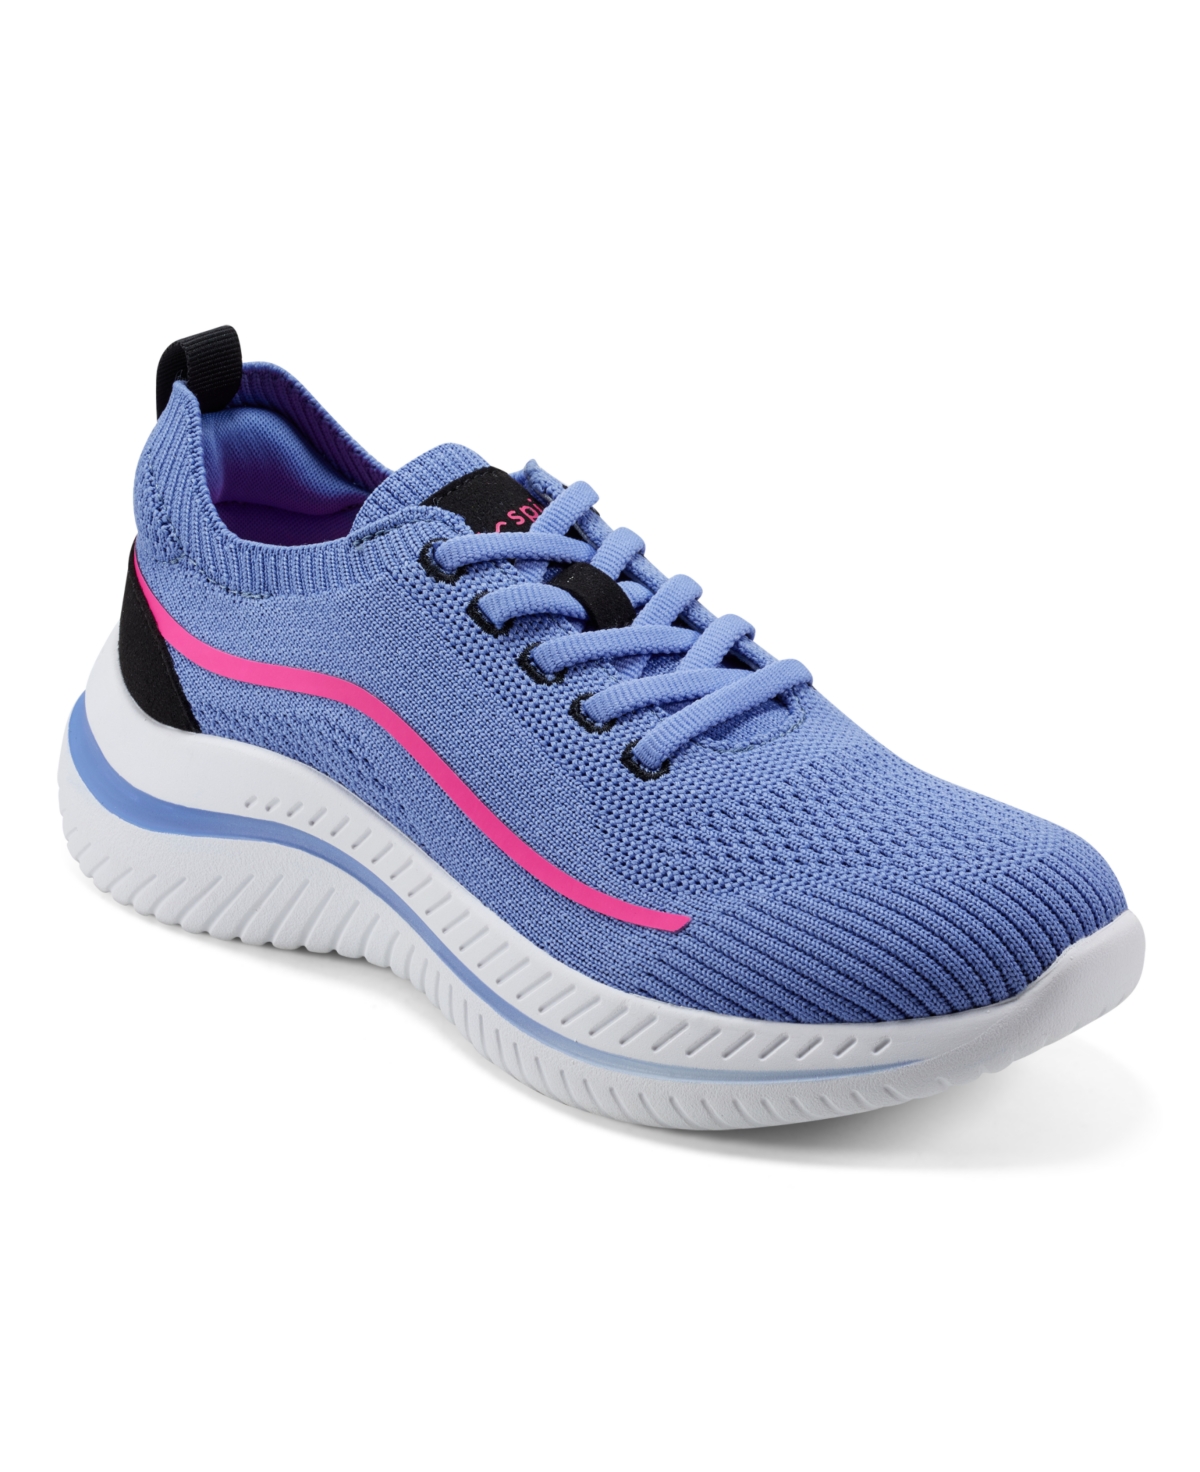 Easy Spirit Women's Gage Lace-up Casual Round Toe Sneakers In Blue,black,pink